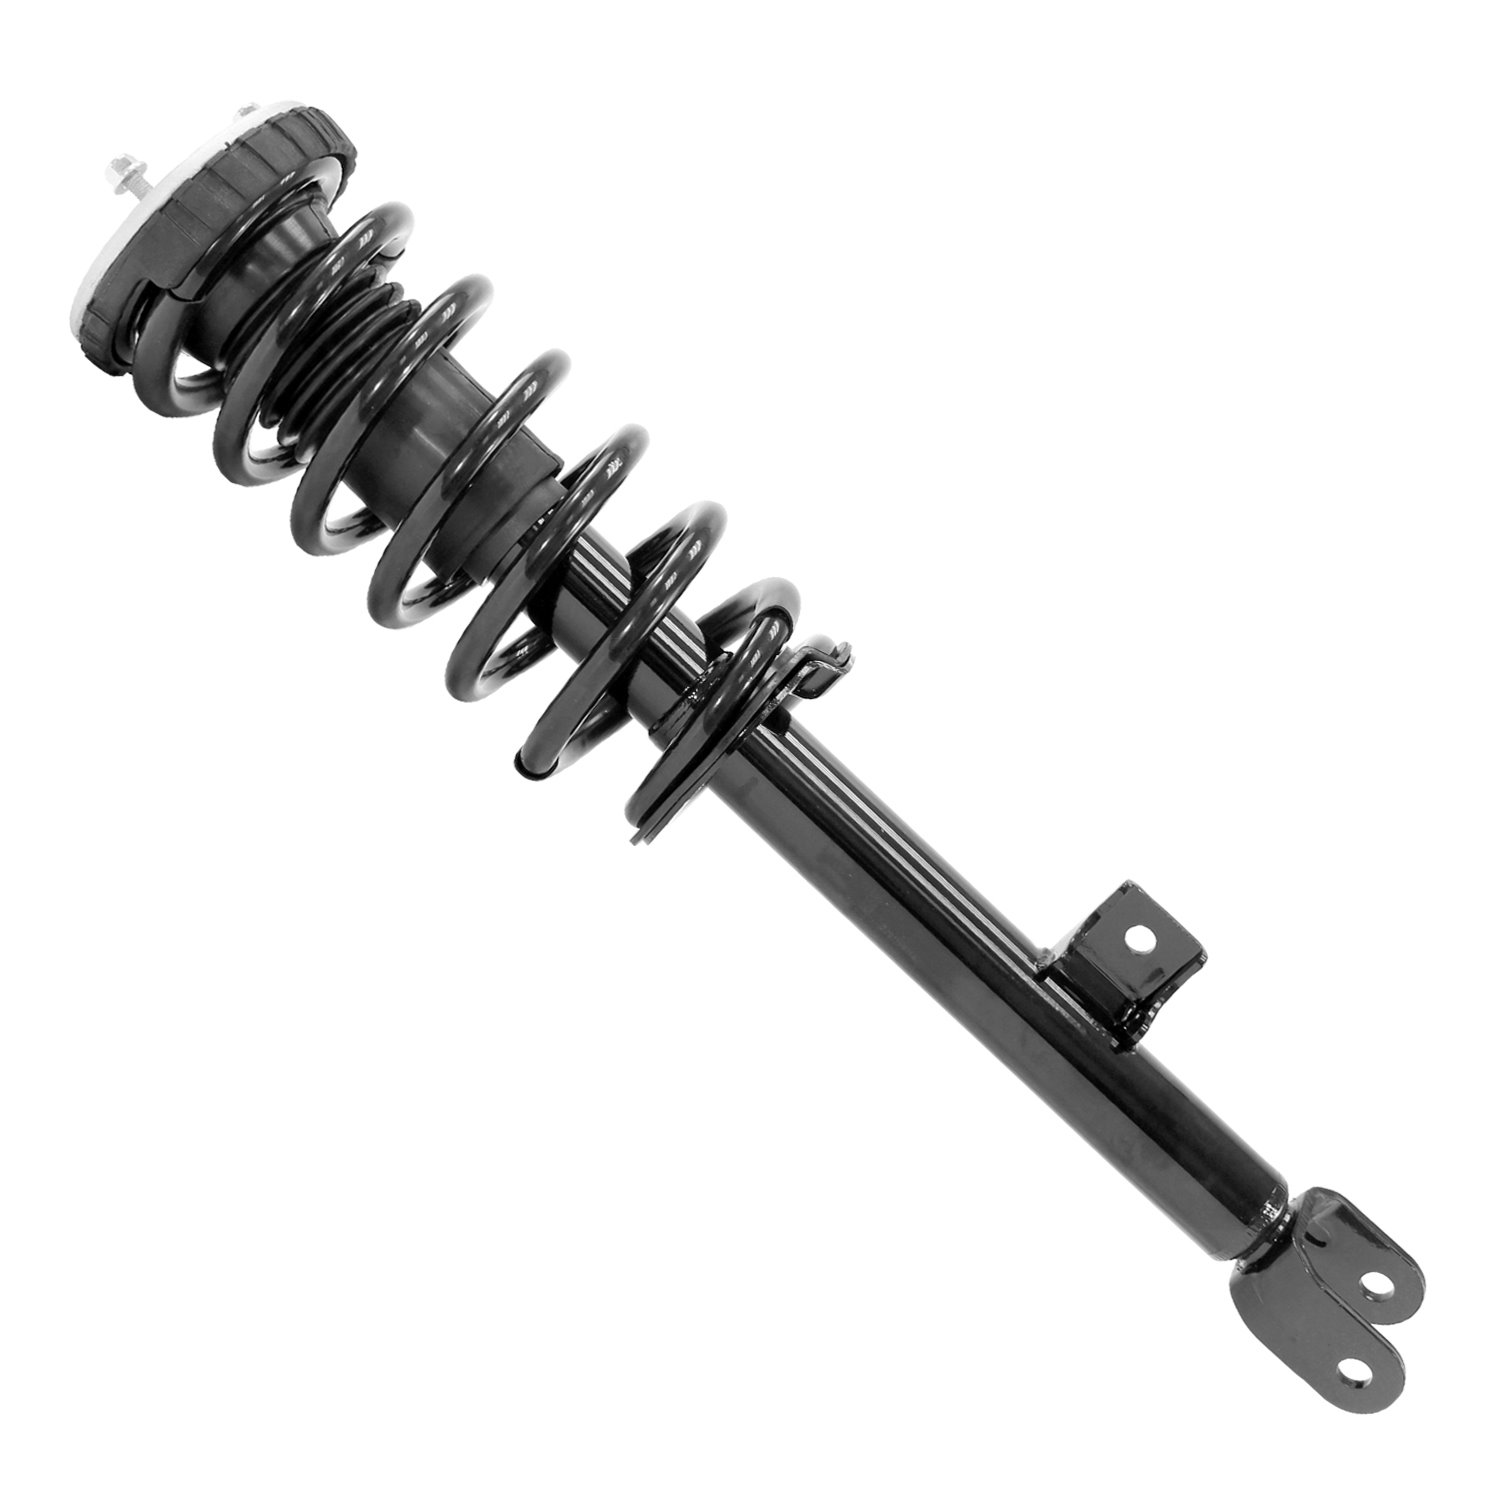 13593 Front Suspension Strut & Coil Spring Assemby Fits Select Genesis G80, Hyundai Genesis